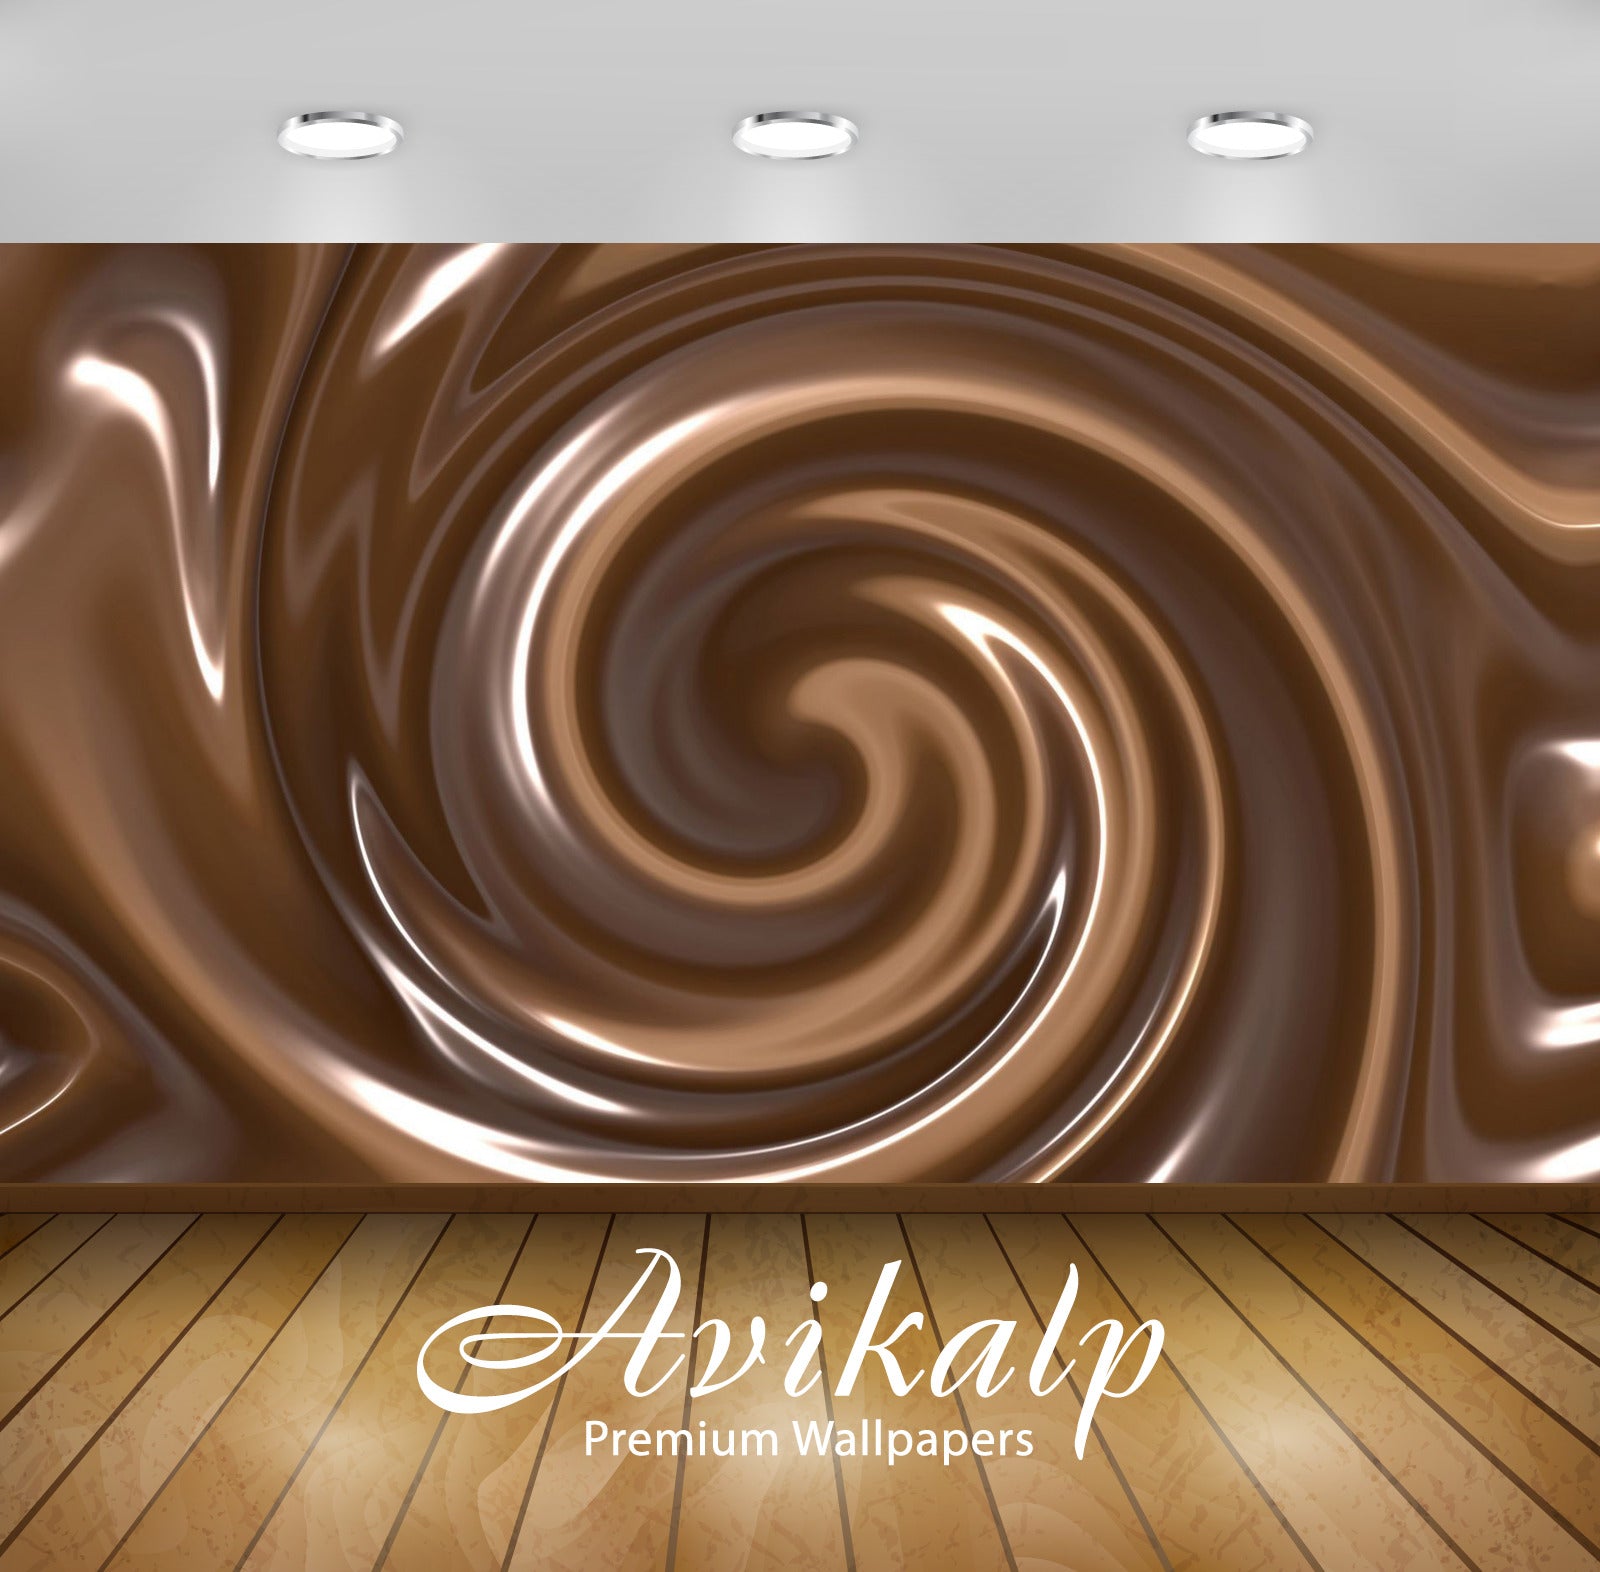 Avikalp Exclusive Awi4116 Chocolate Swirl Full HD Wallpapers for Living room, Hall, Kids Room, Kitch